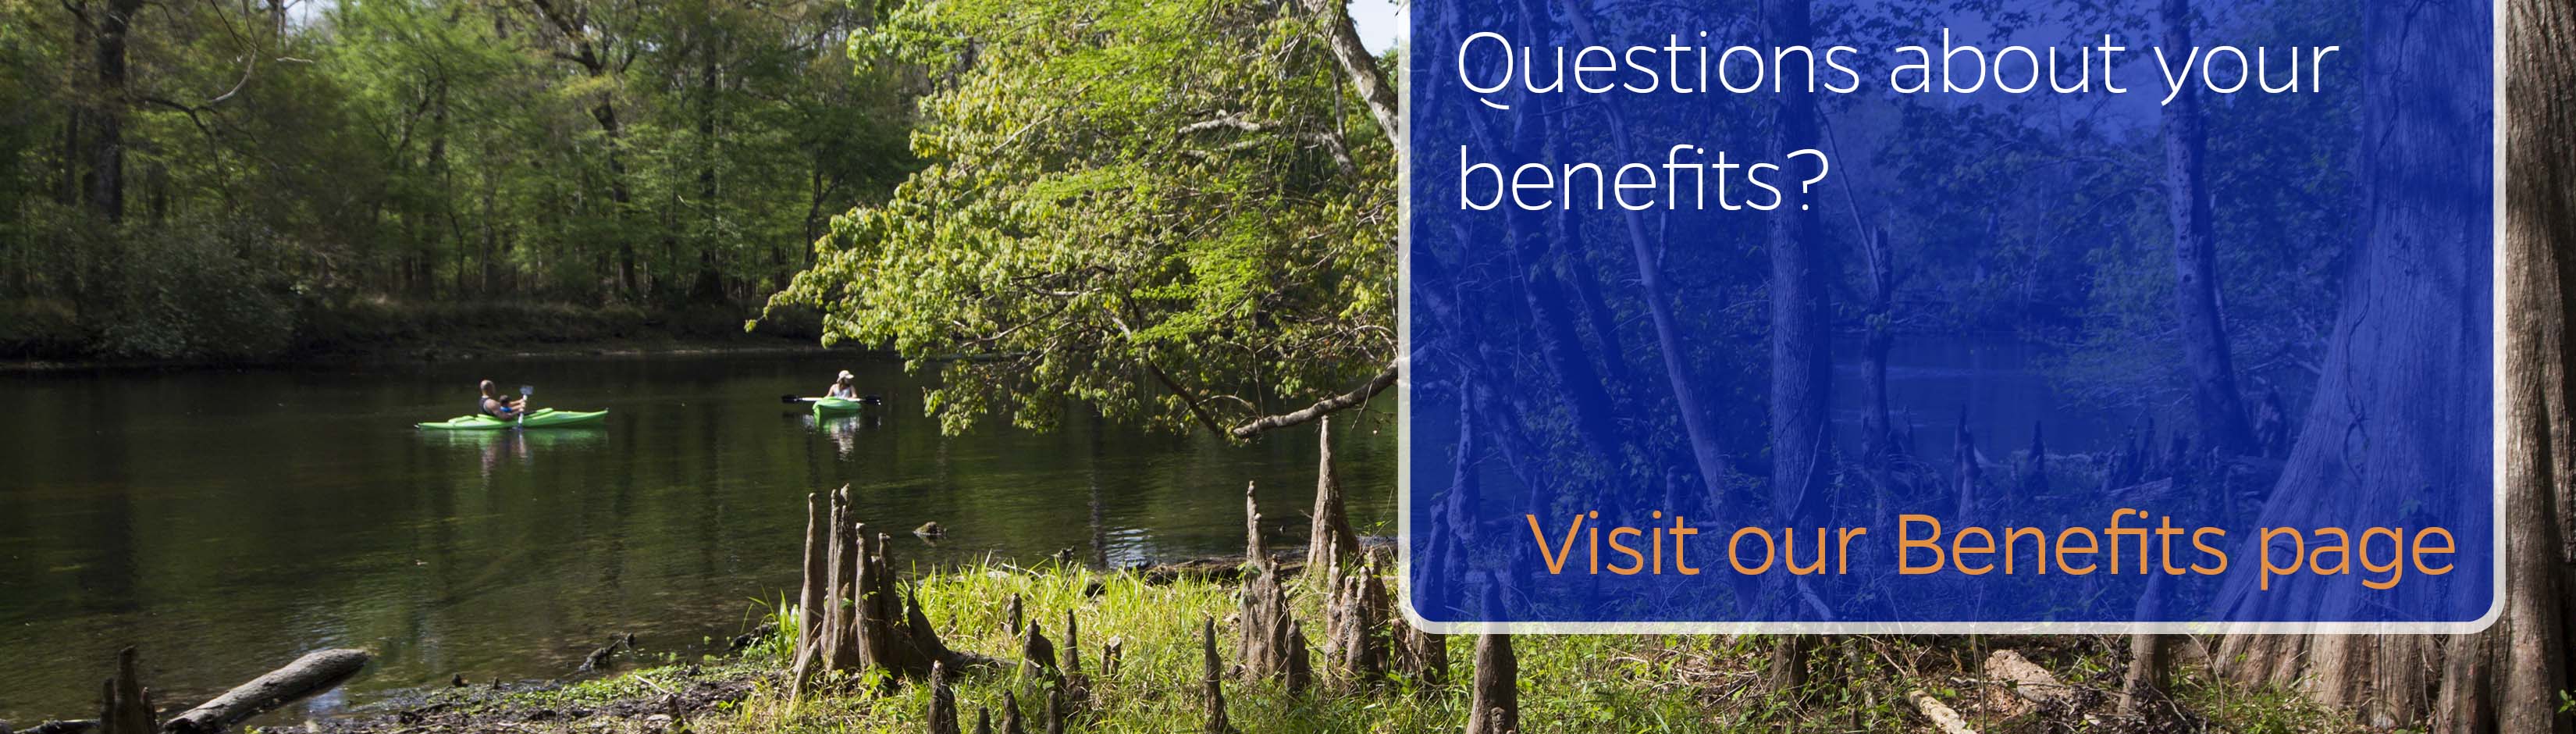 Questions about your benefits? View our benefits page